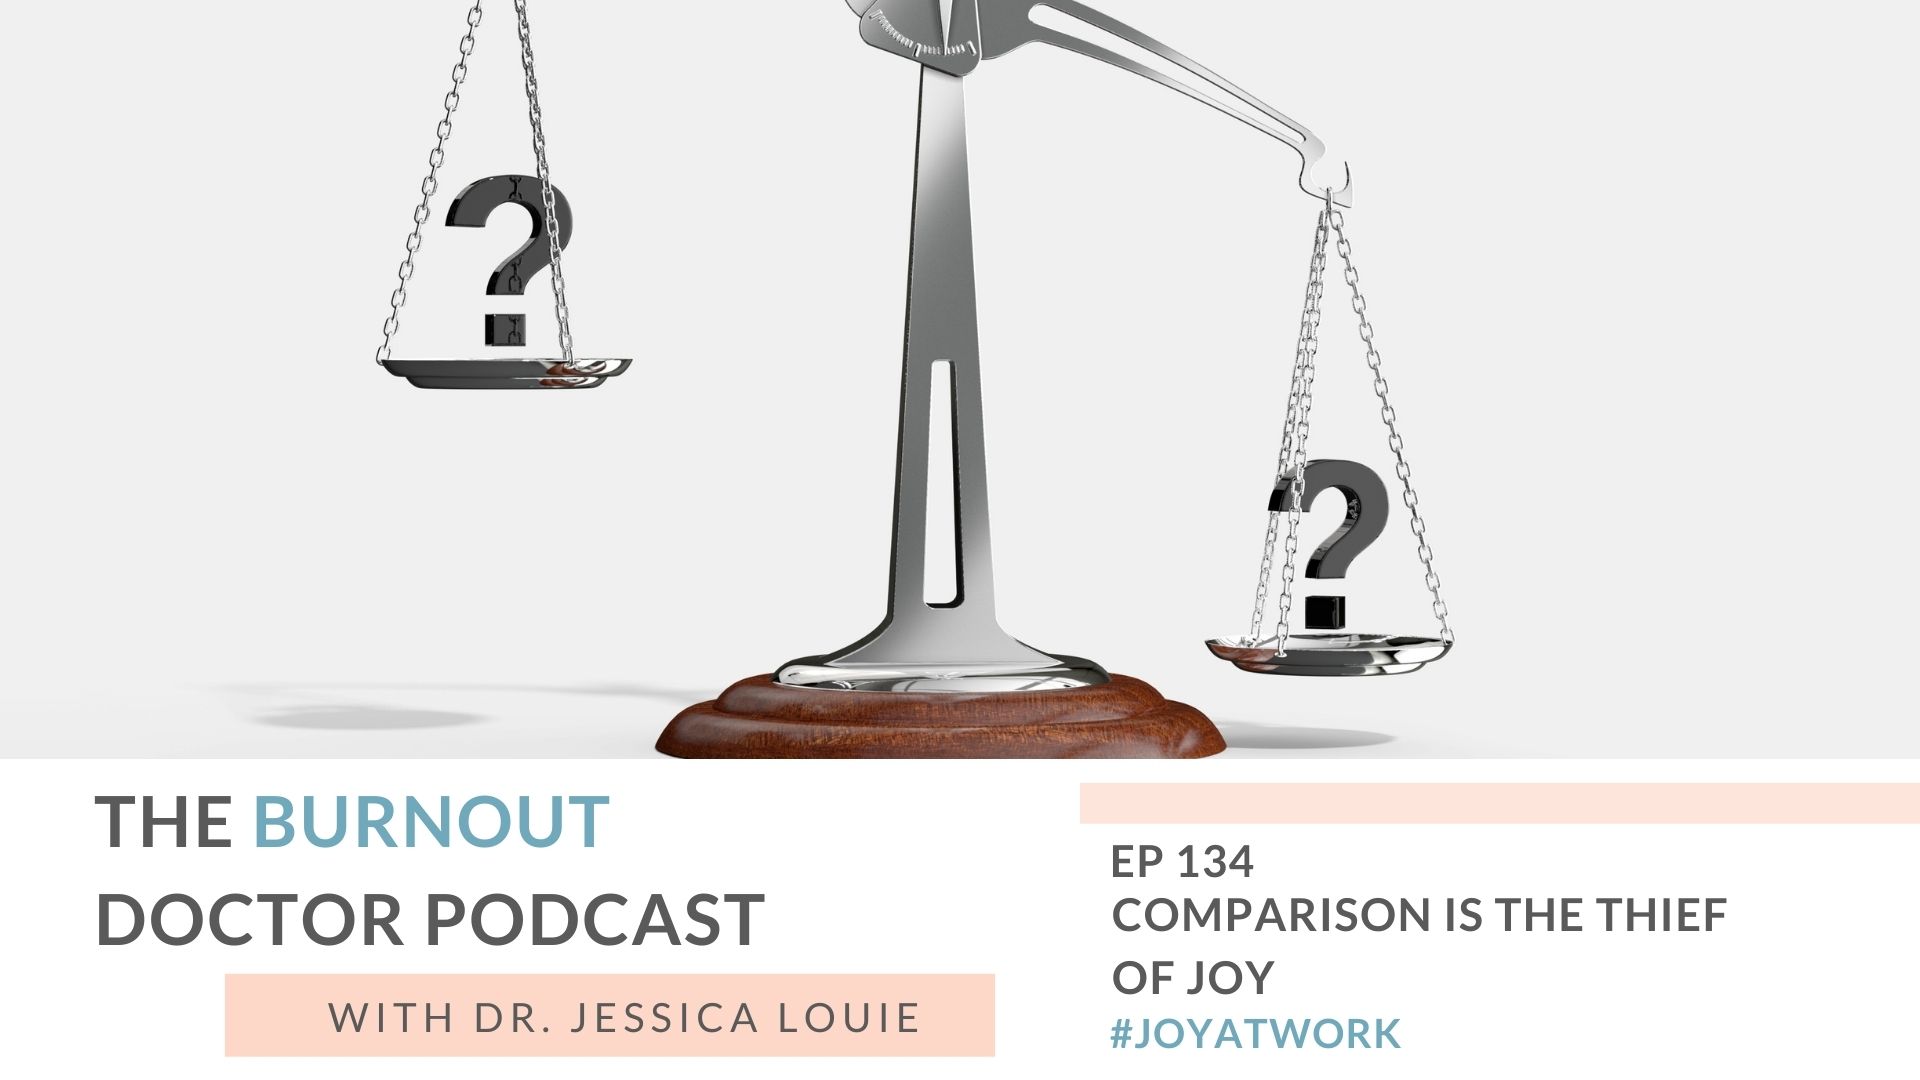 Comparison is the thief of joy. How to stop comparison syndrome. The Burnout Doctor Podcast with Dr. Jessica Louie. Keynote speaker on burnout, clutter, konmari, simplifying.